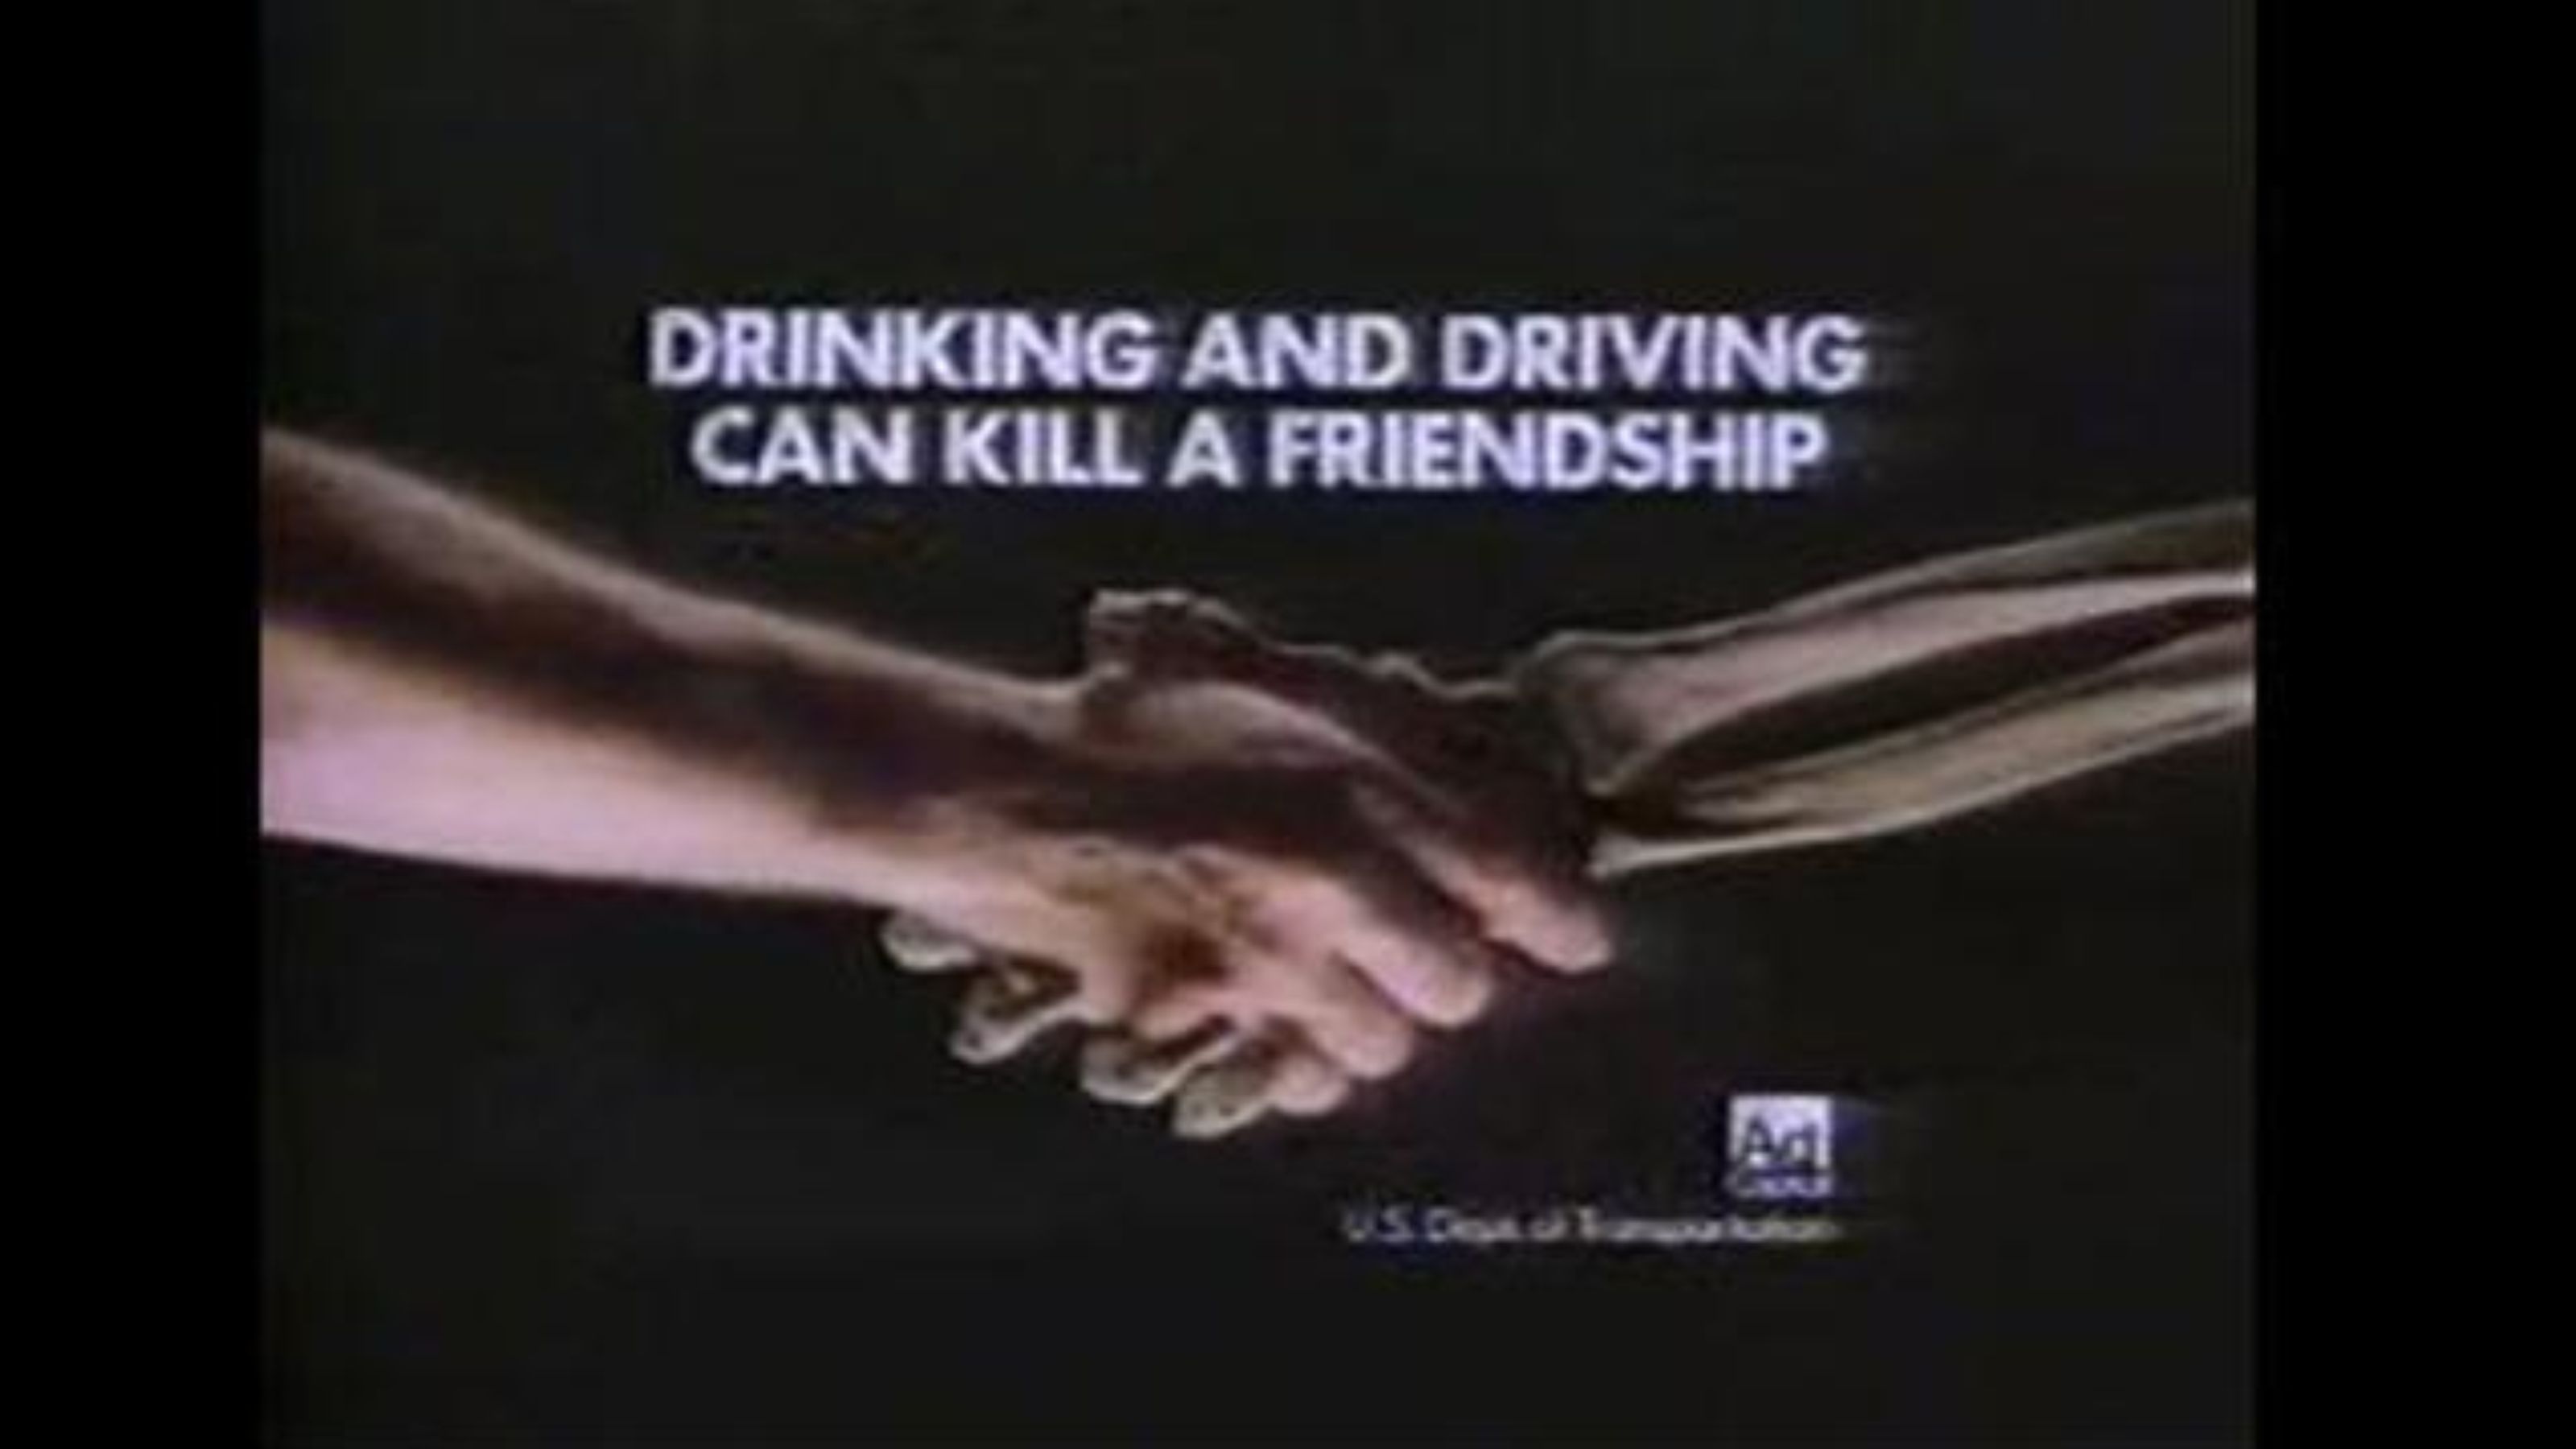 To Stop Drunk Driving Quotes. QuotesGram